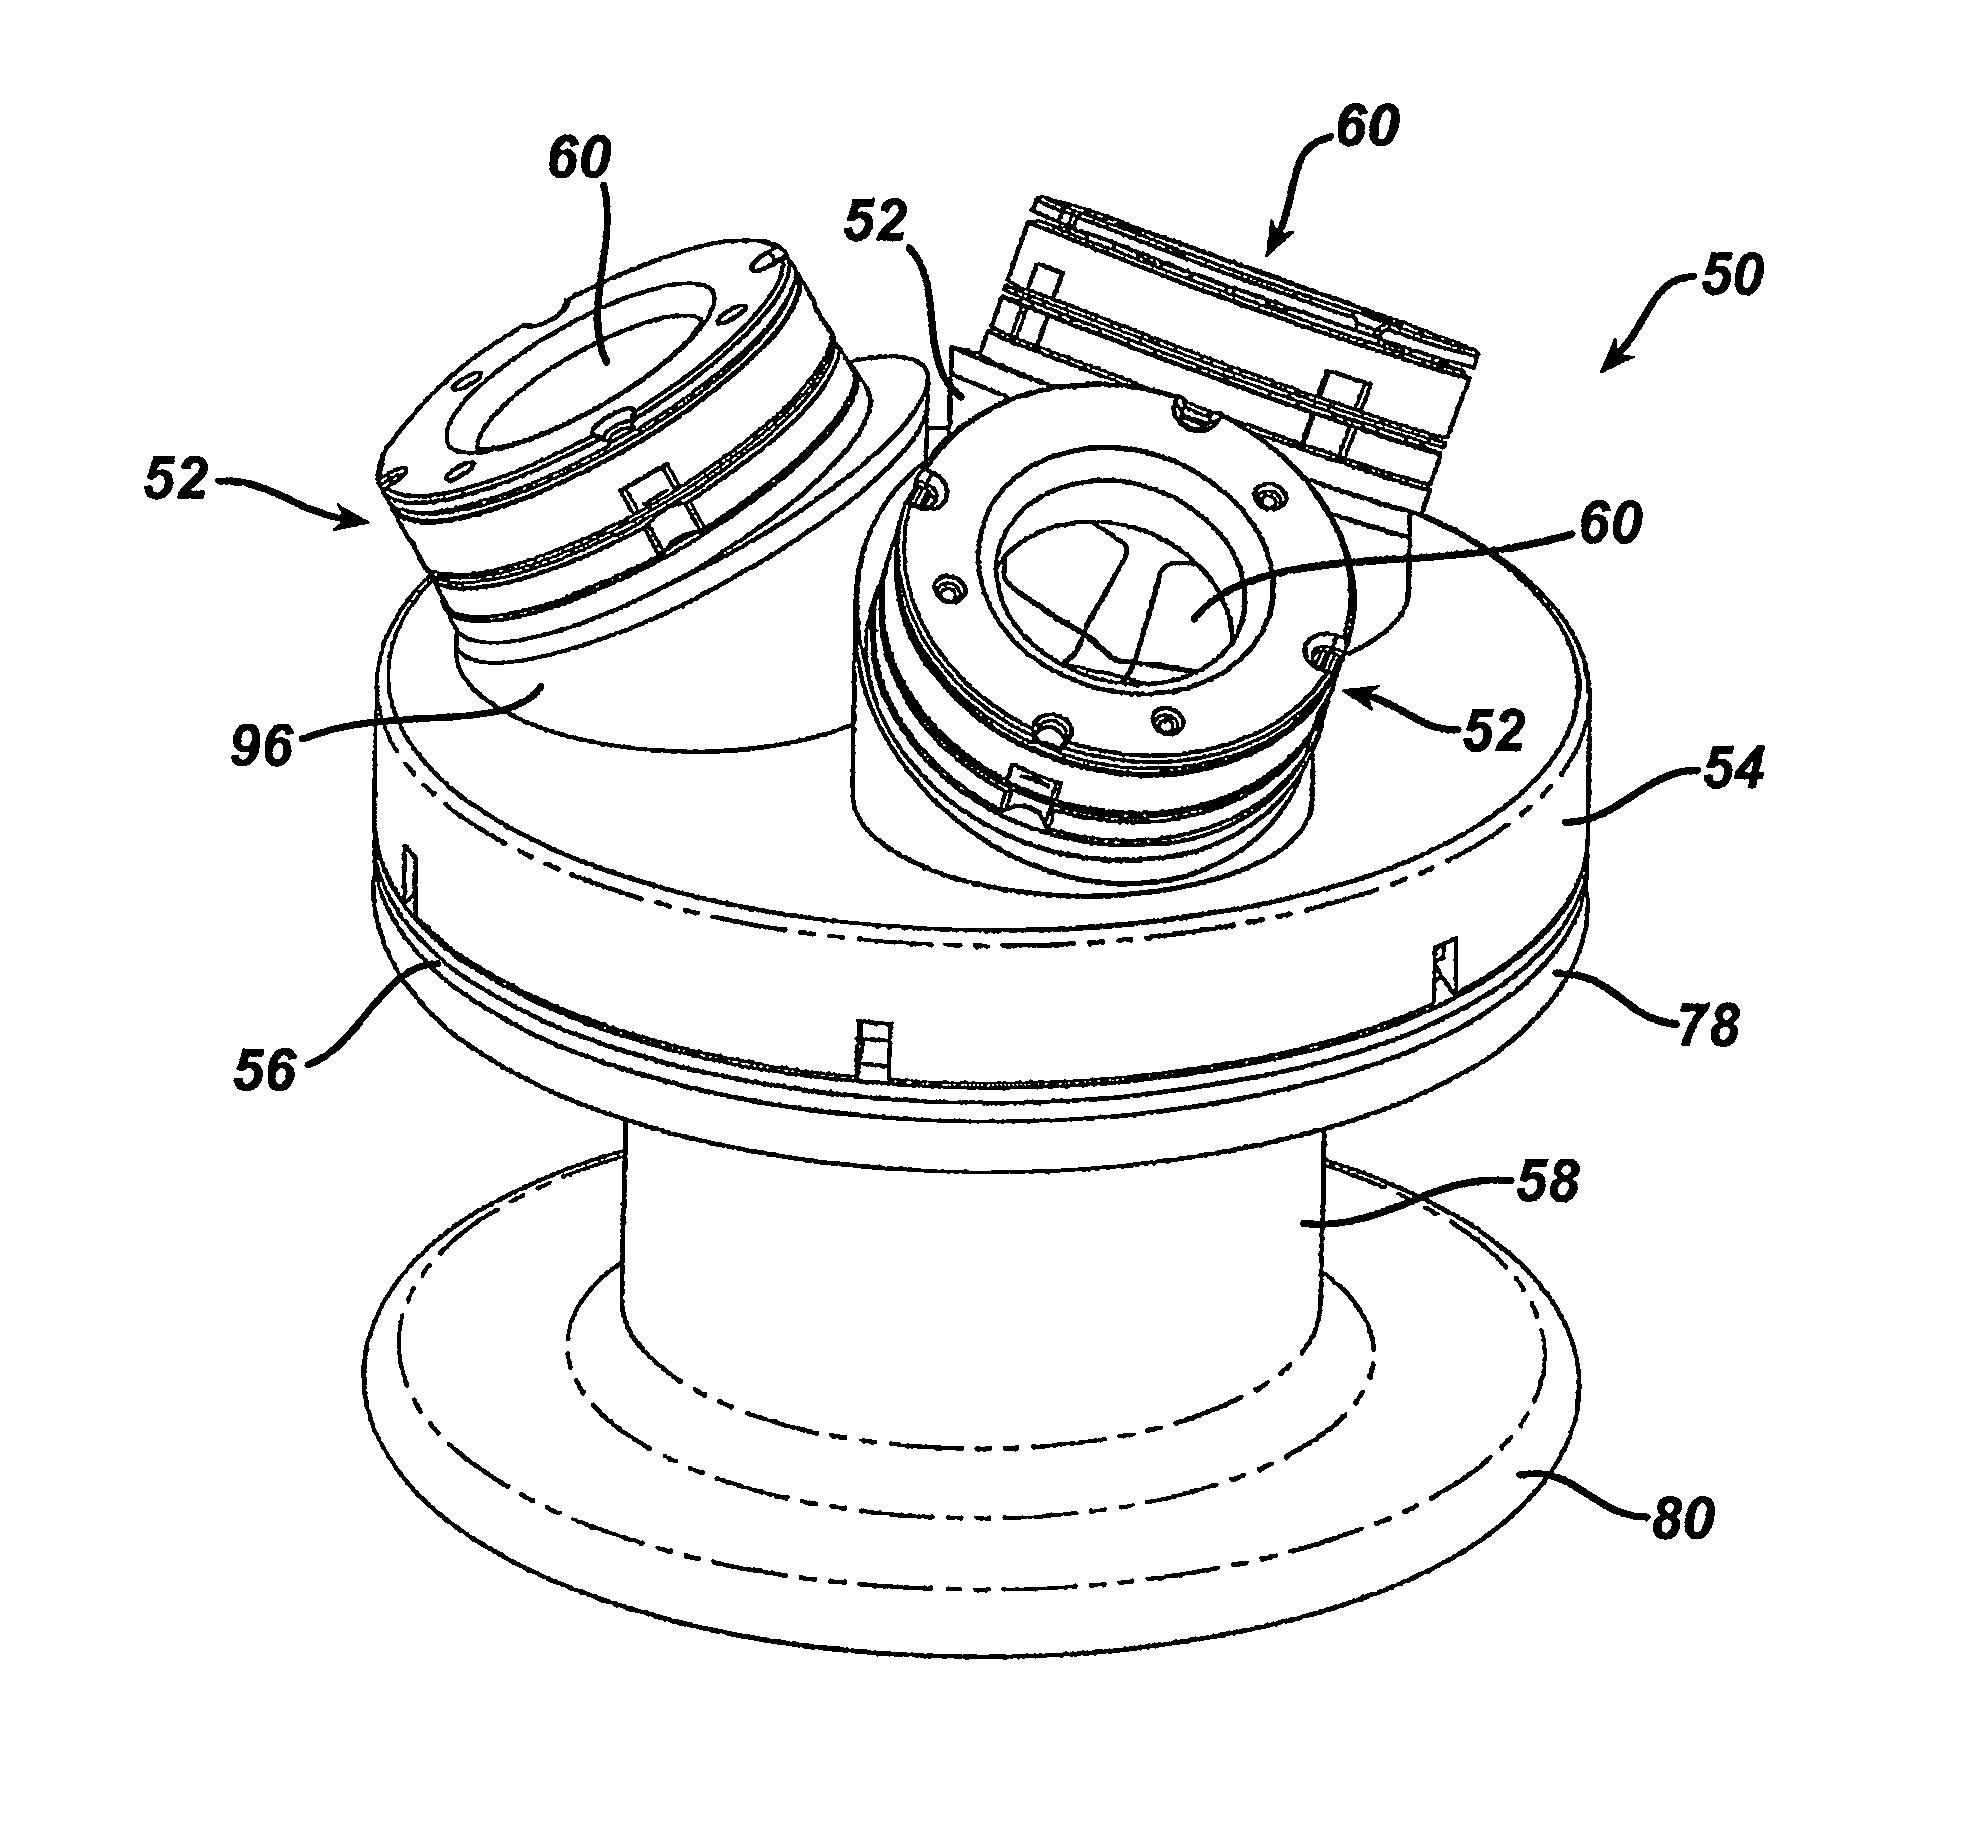 Surgical access device